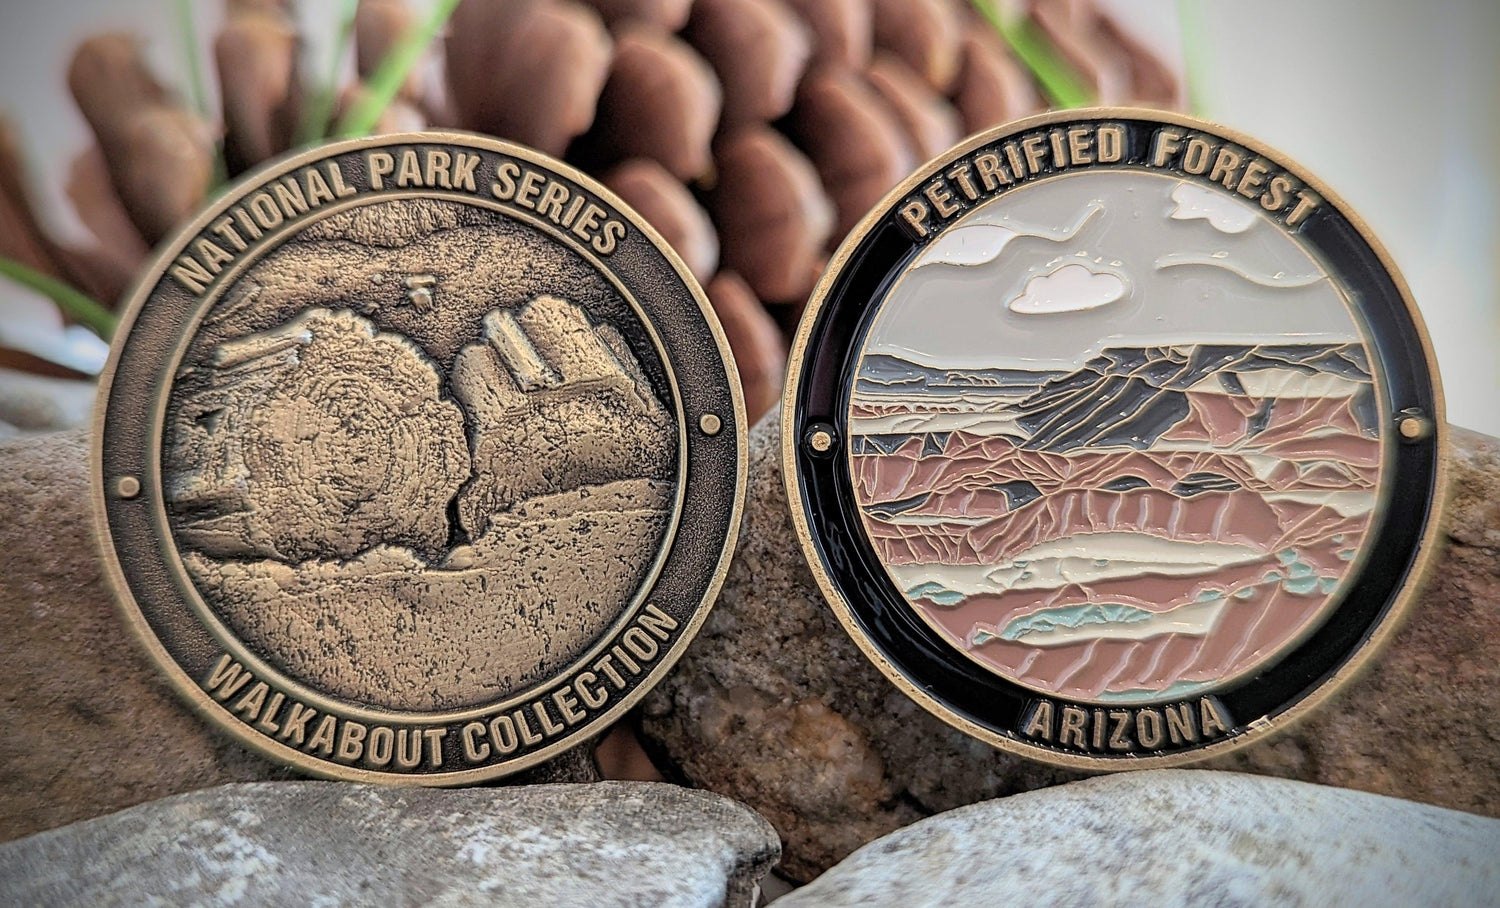 PETRIFIED FOREST NATIONAL PARK CHALLENGE COIN